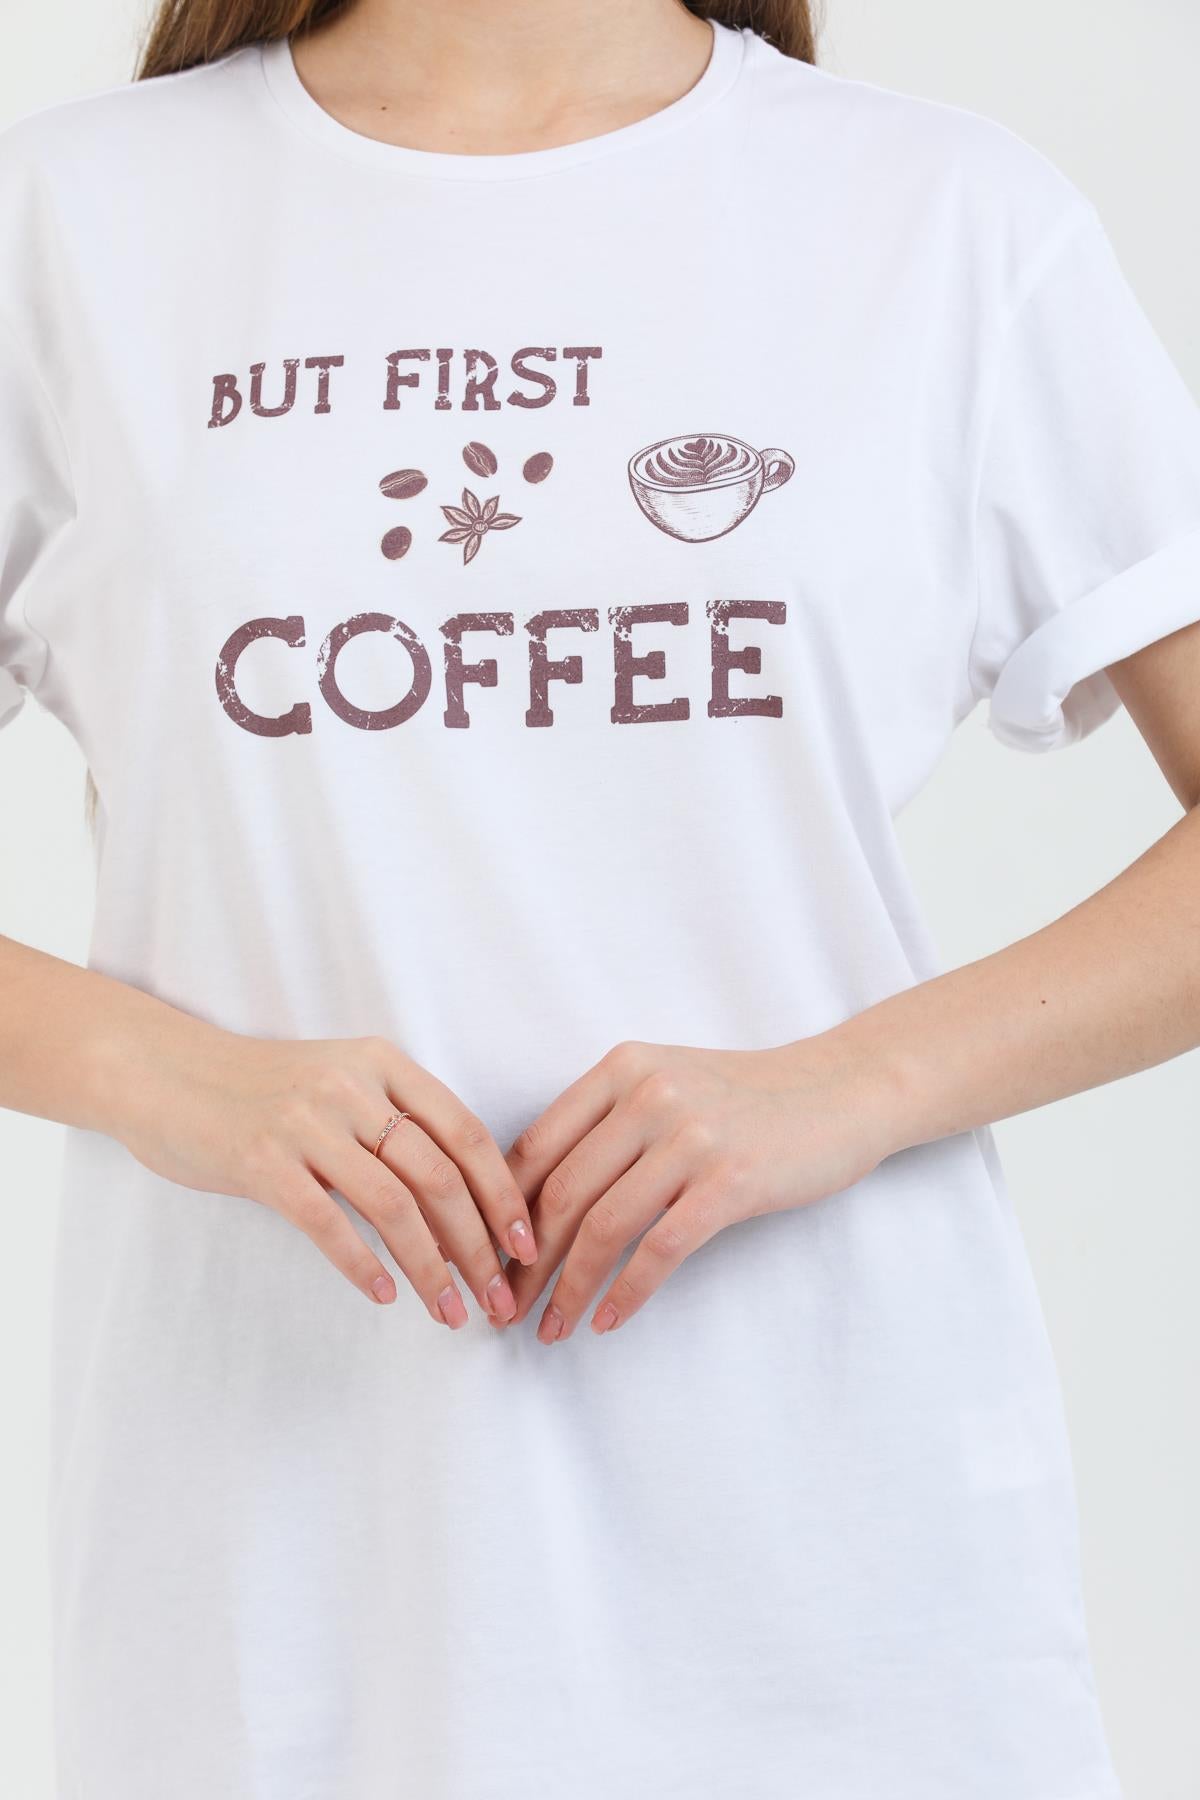 But first Coffee Printed Cotton Crew Neck Oversize female T -shirt.